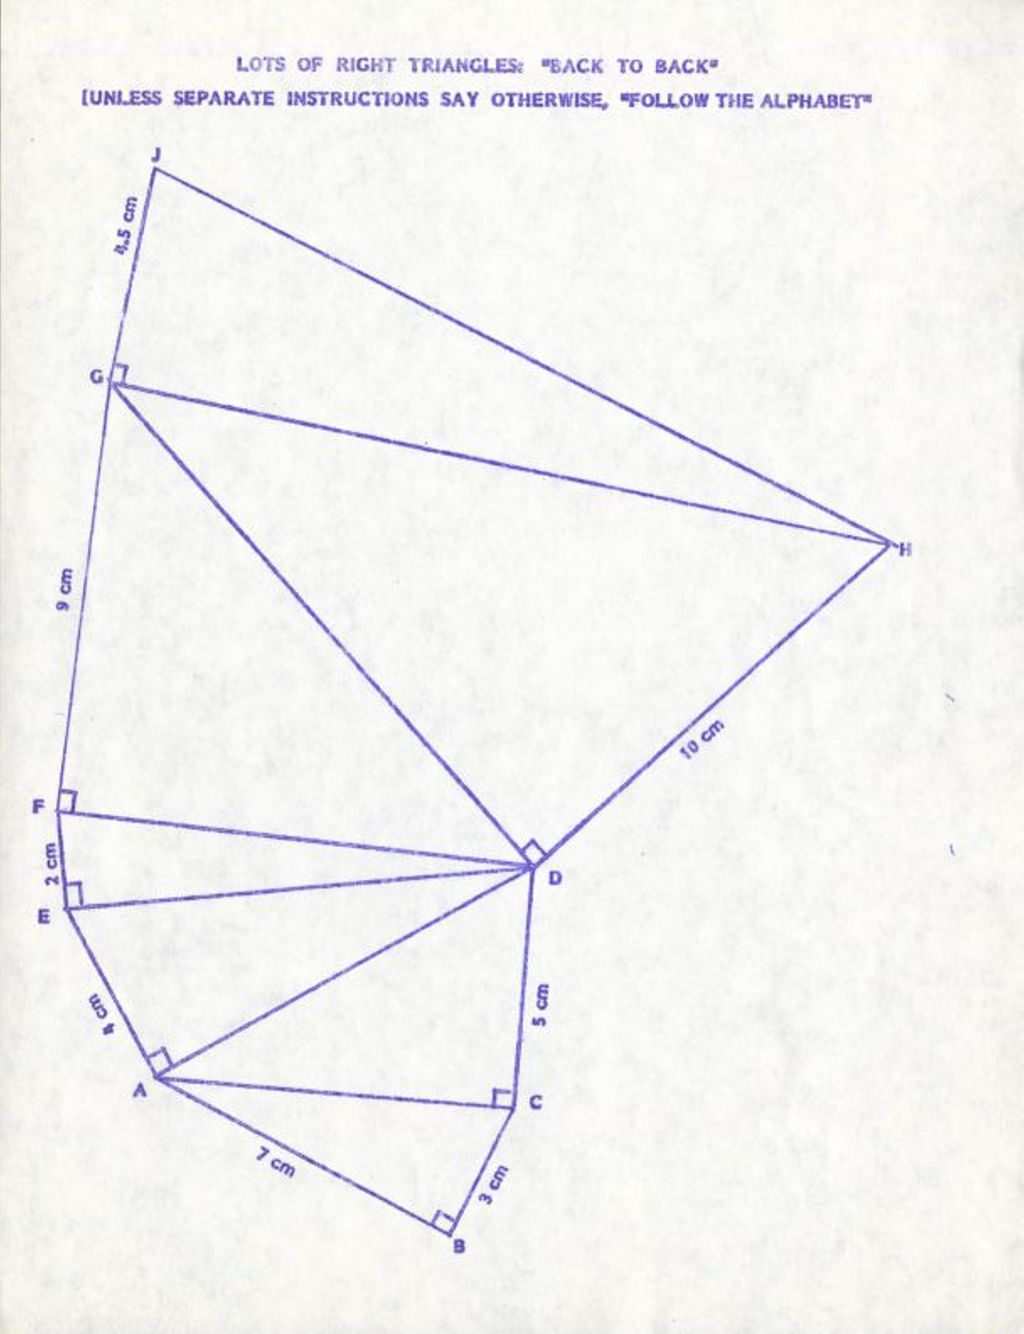 Miniature of Lots of Right Triangles “Back to Back” (image only)